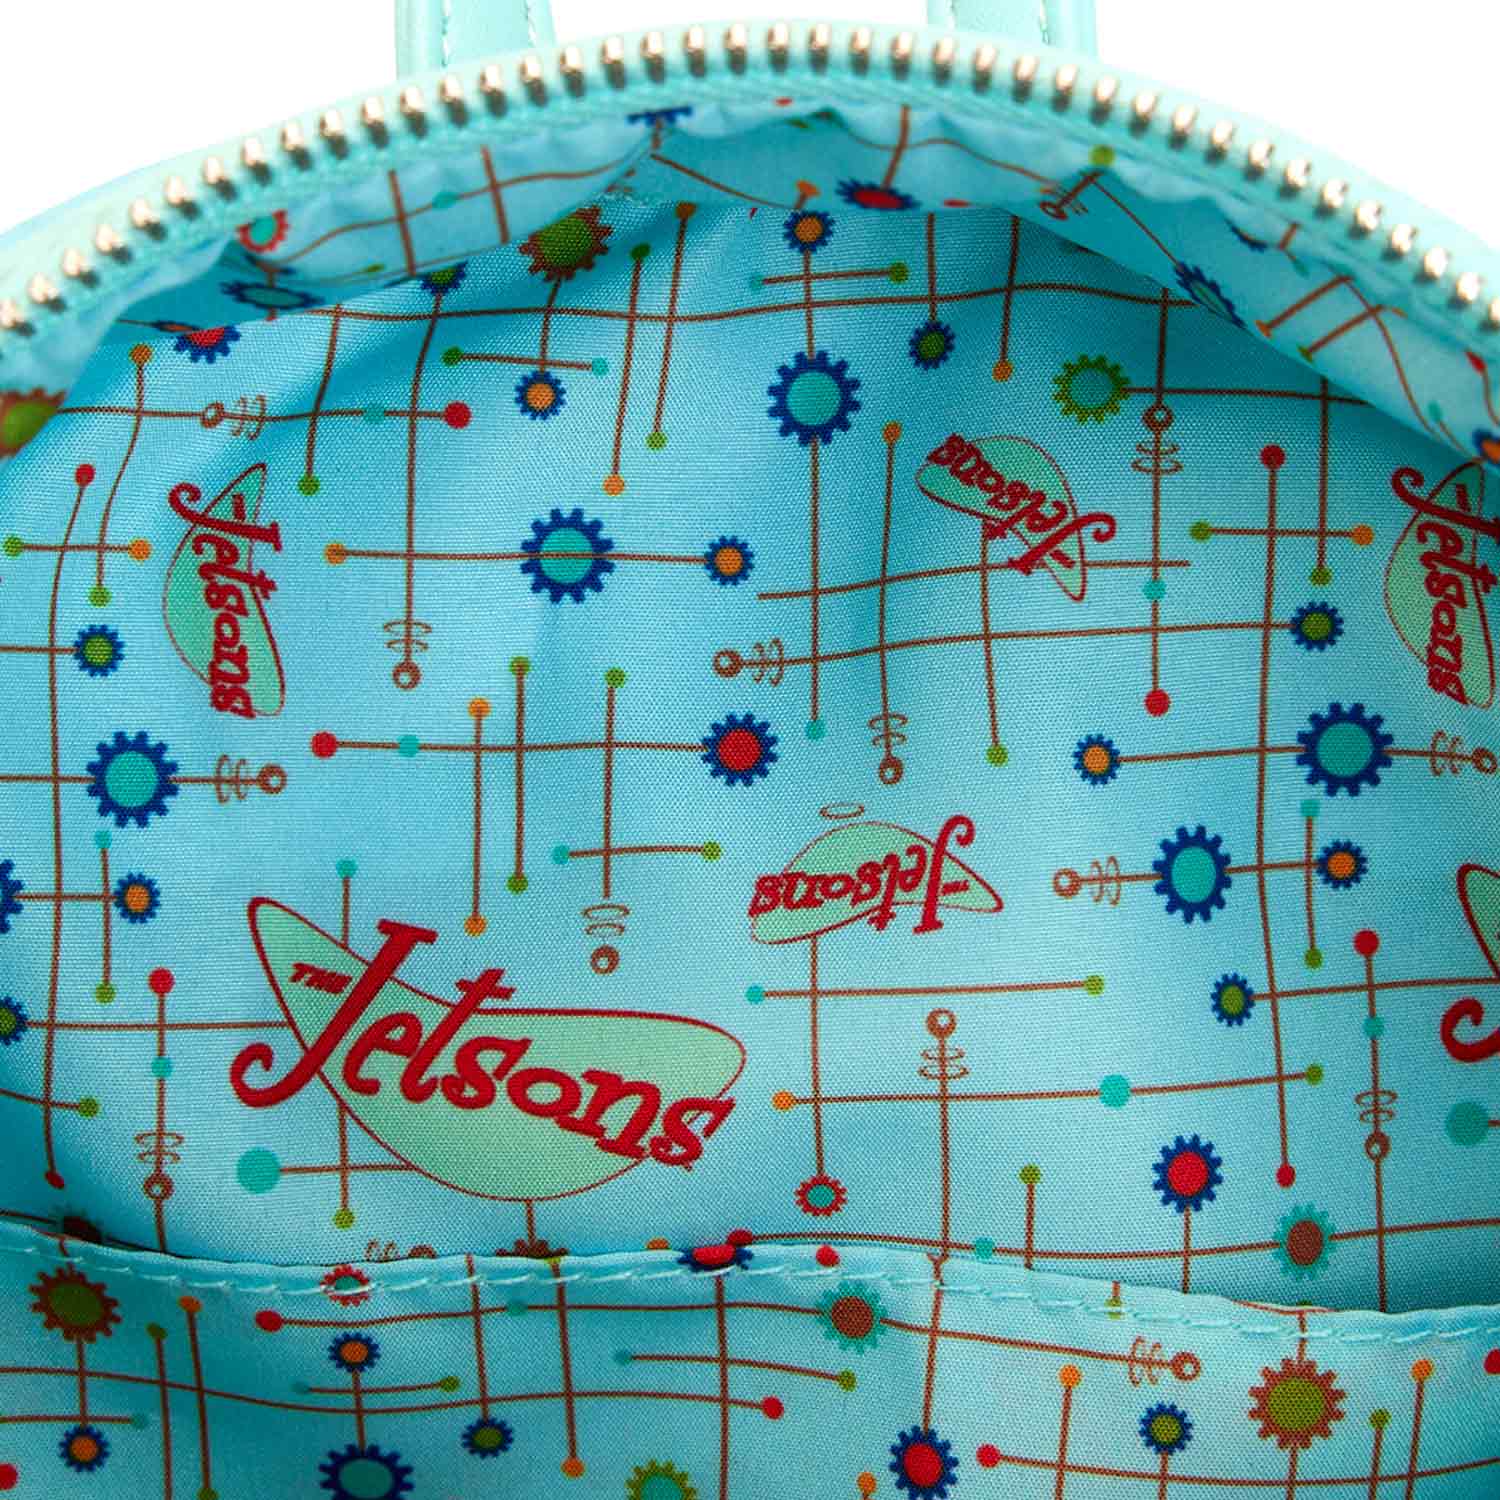 Loungefly x The Jetsons Spaceship Mini Backpack - GeekCore